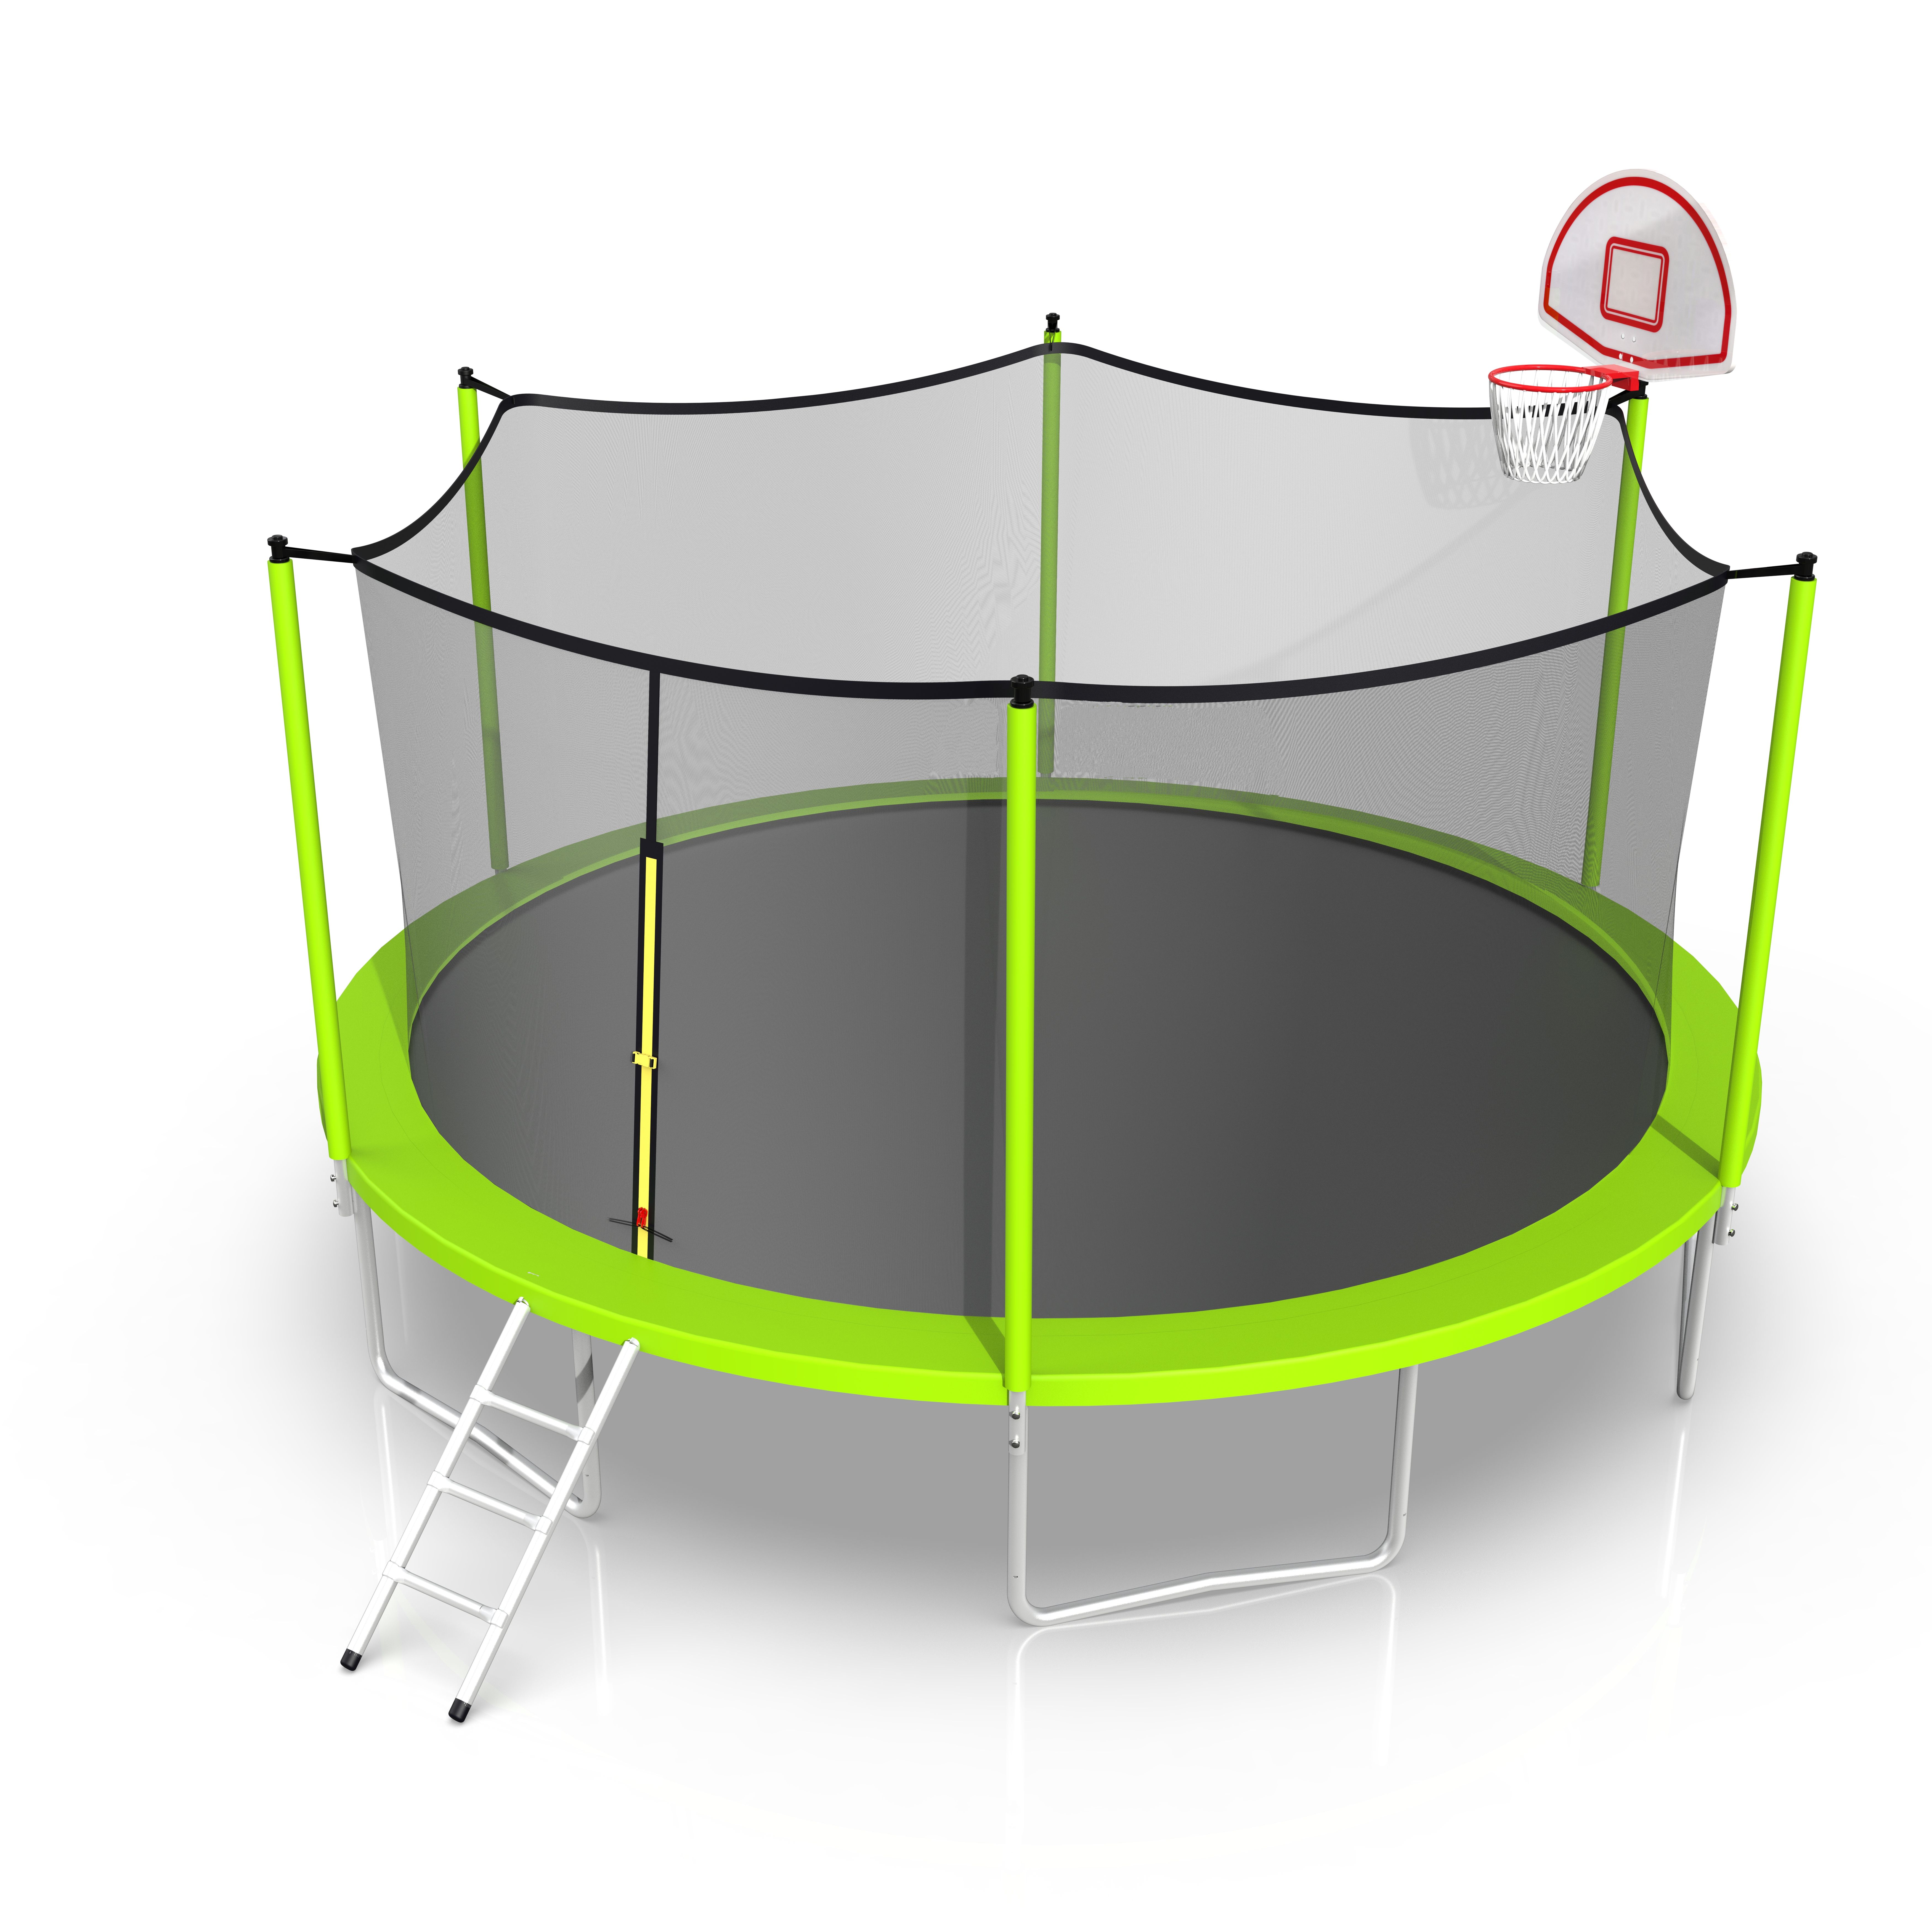 16ft Trampoline with Enclosure, New Upgraded Kids Outdoor Trampoline with Basketball Hoop and Ladder, Heavy-Duty Round Trampoline，Green-CASAINC